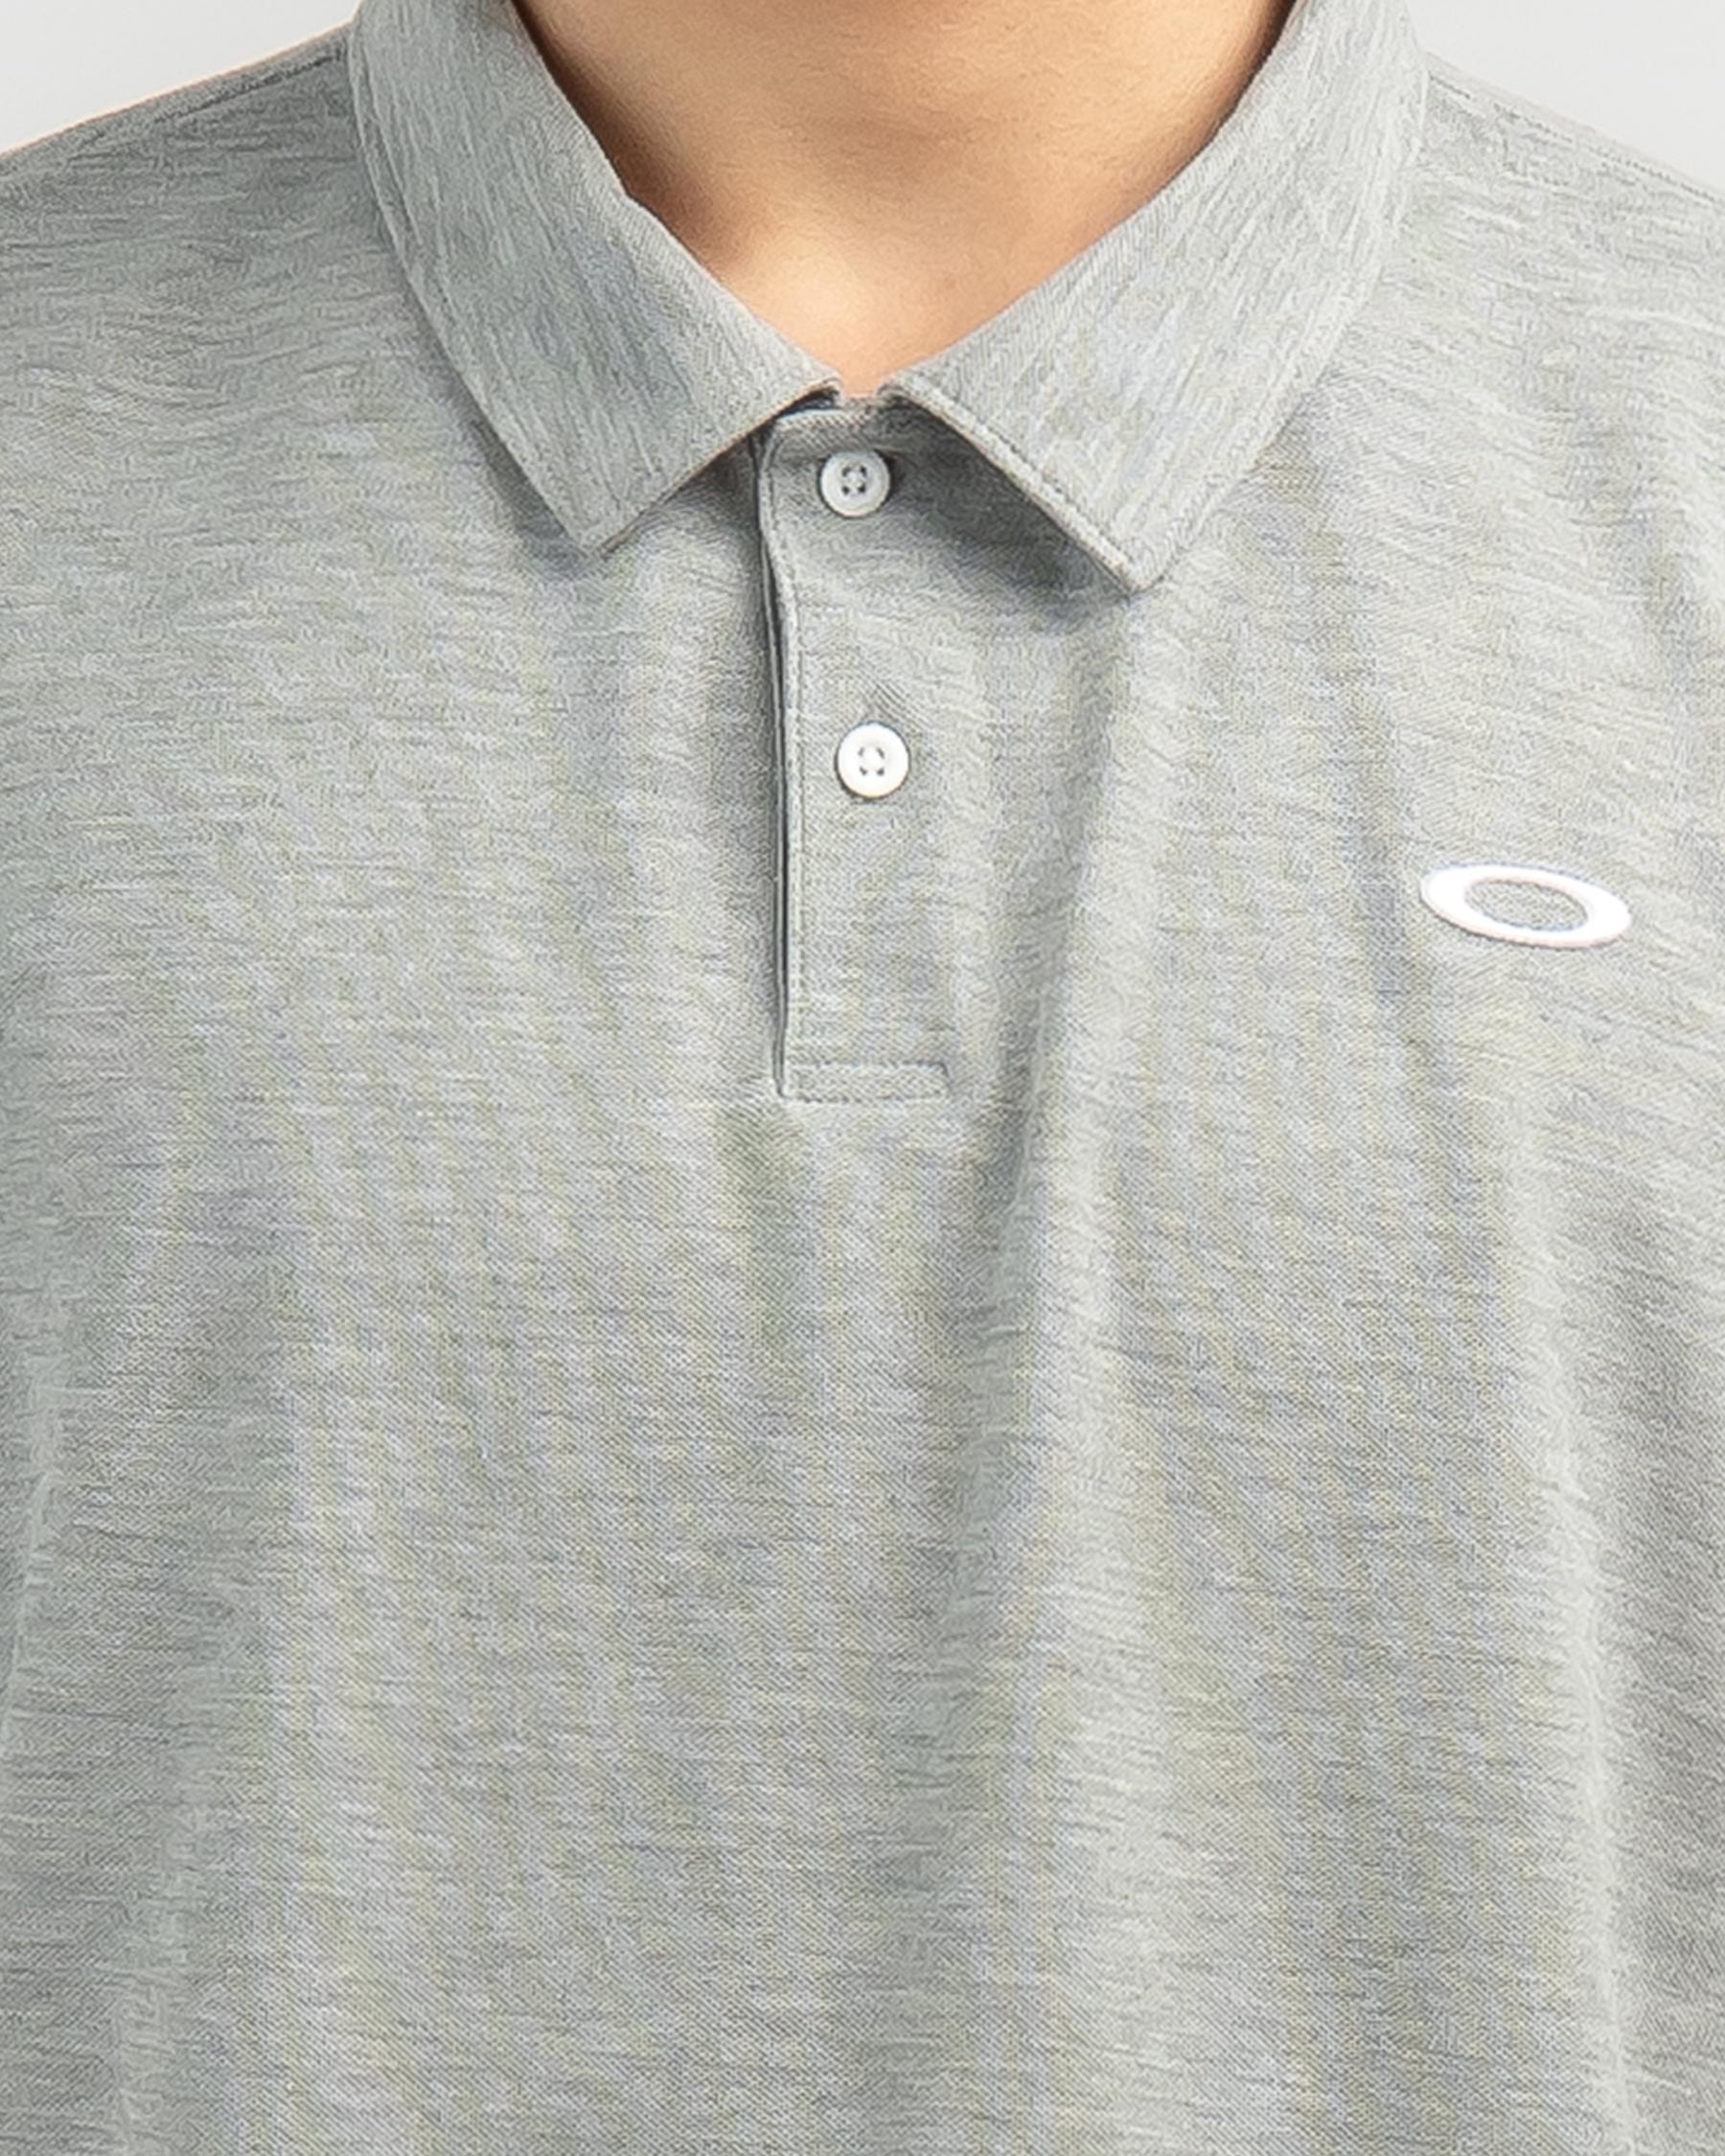 Oakley Relax Urban Polo Shirt In New Granite Heather - Fast Shipping ...